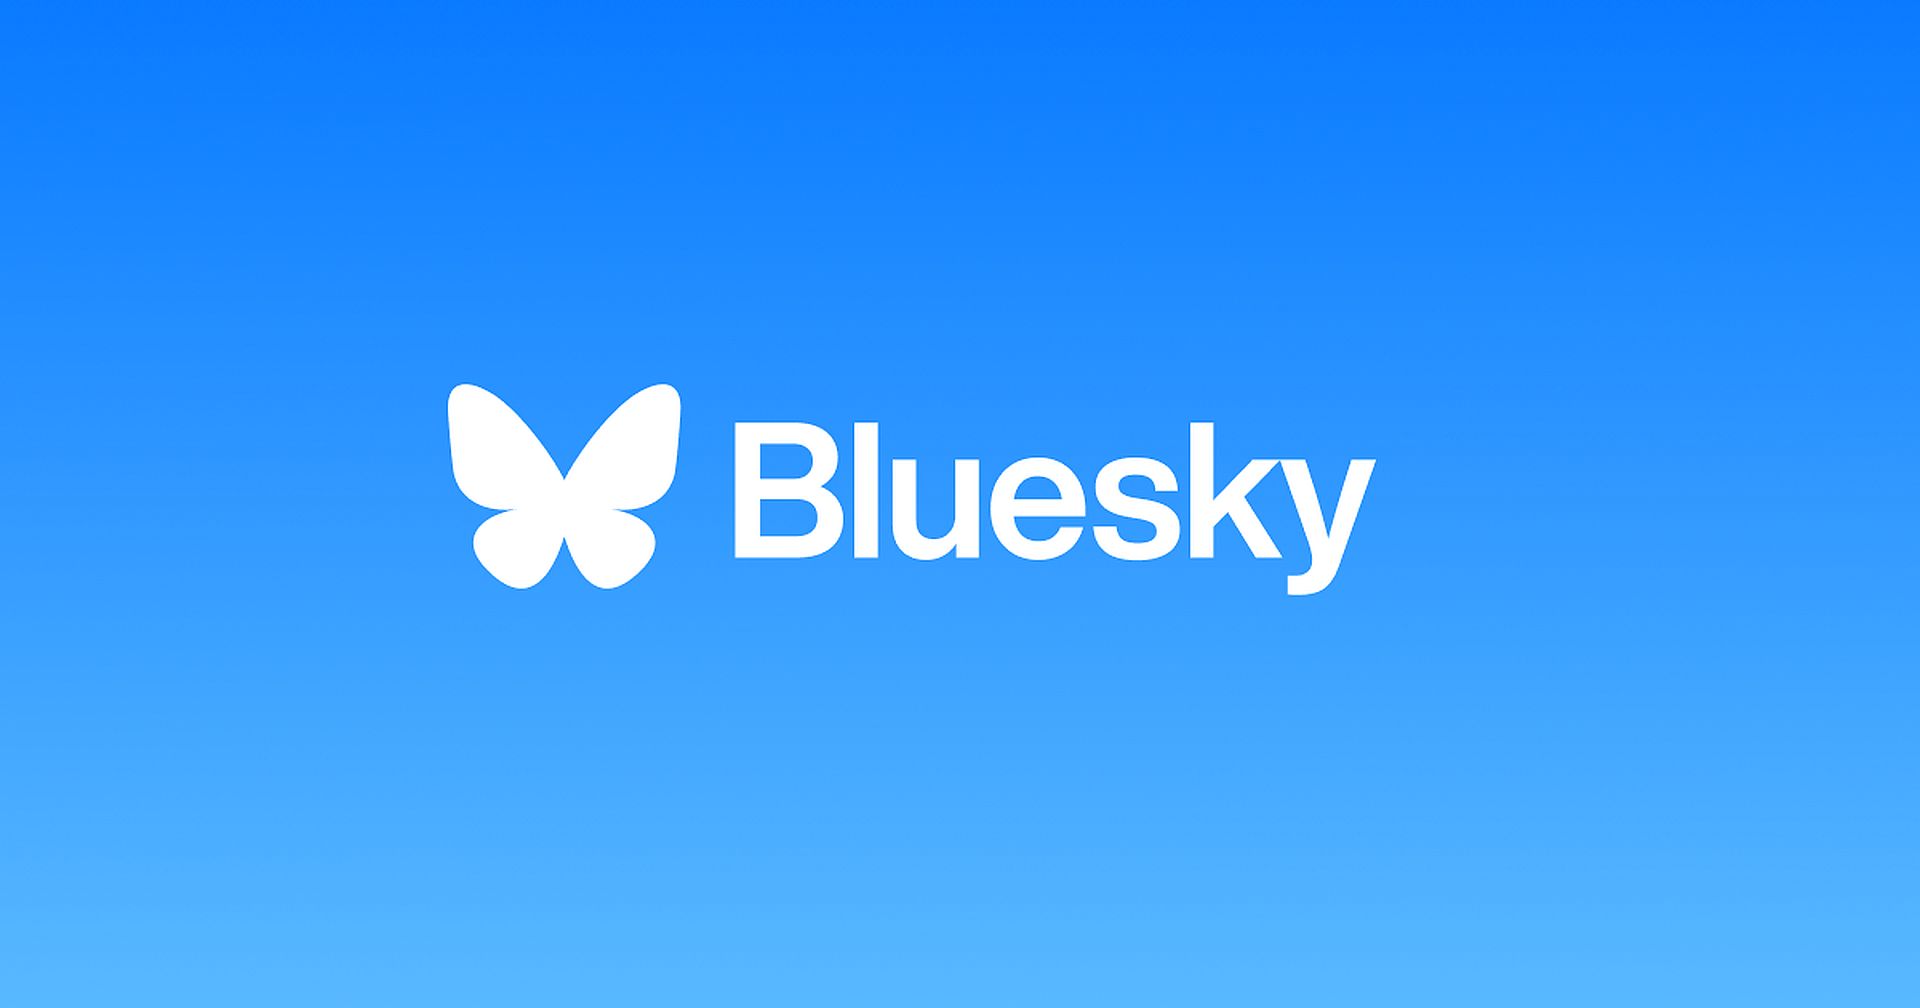 Bluesky signup process explained step-by-step 